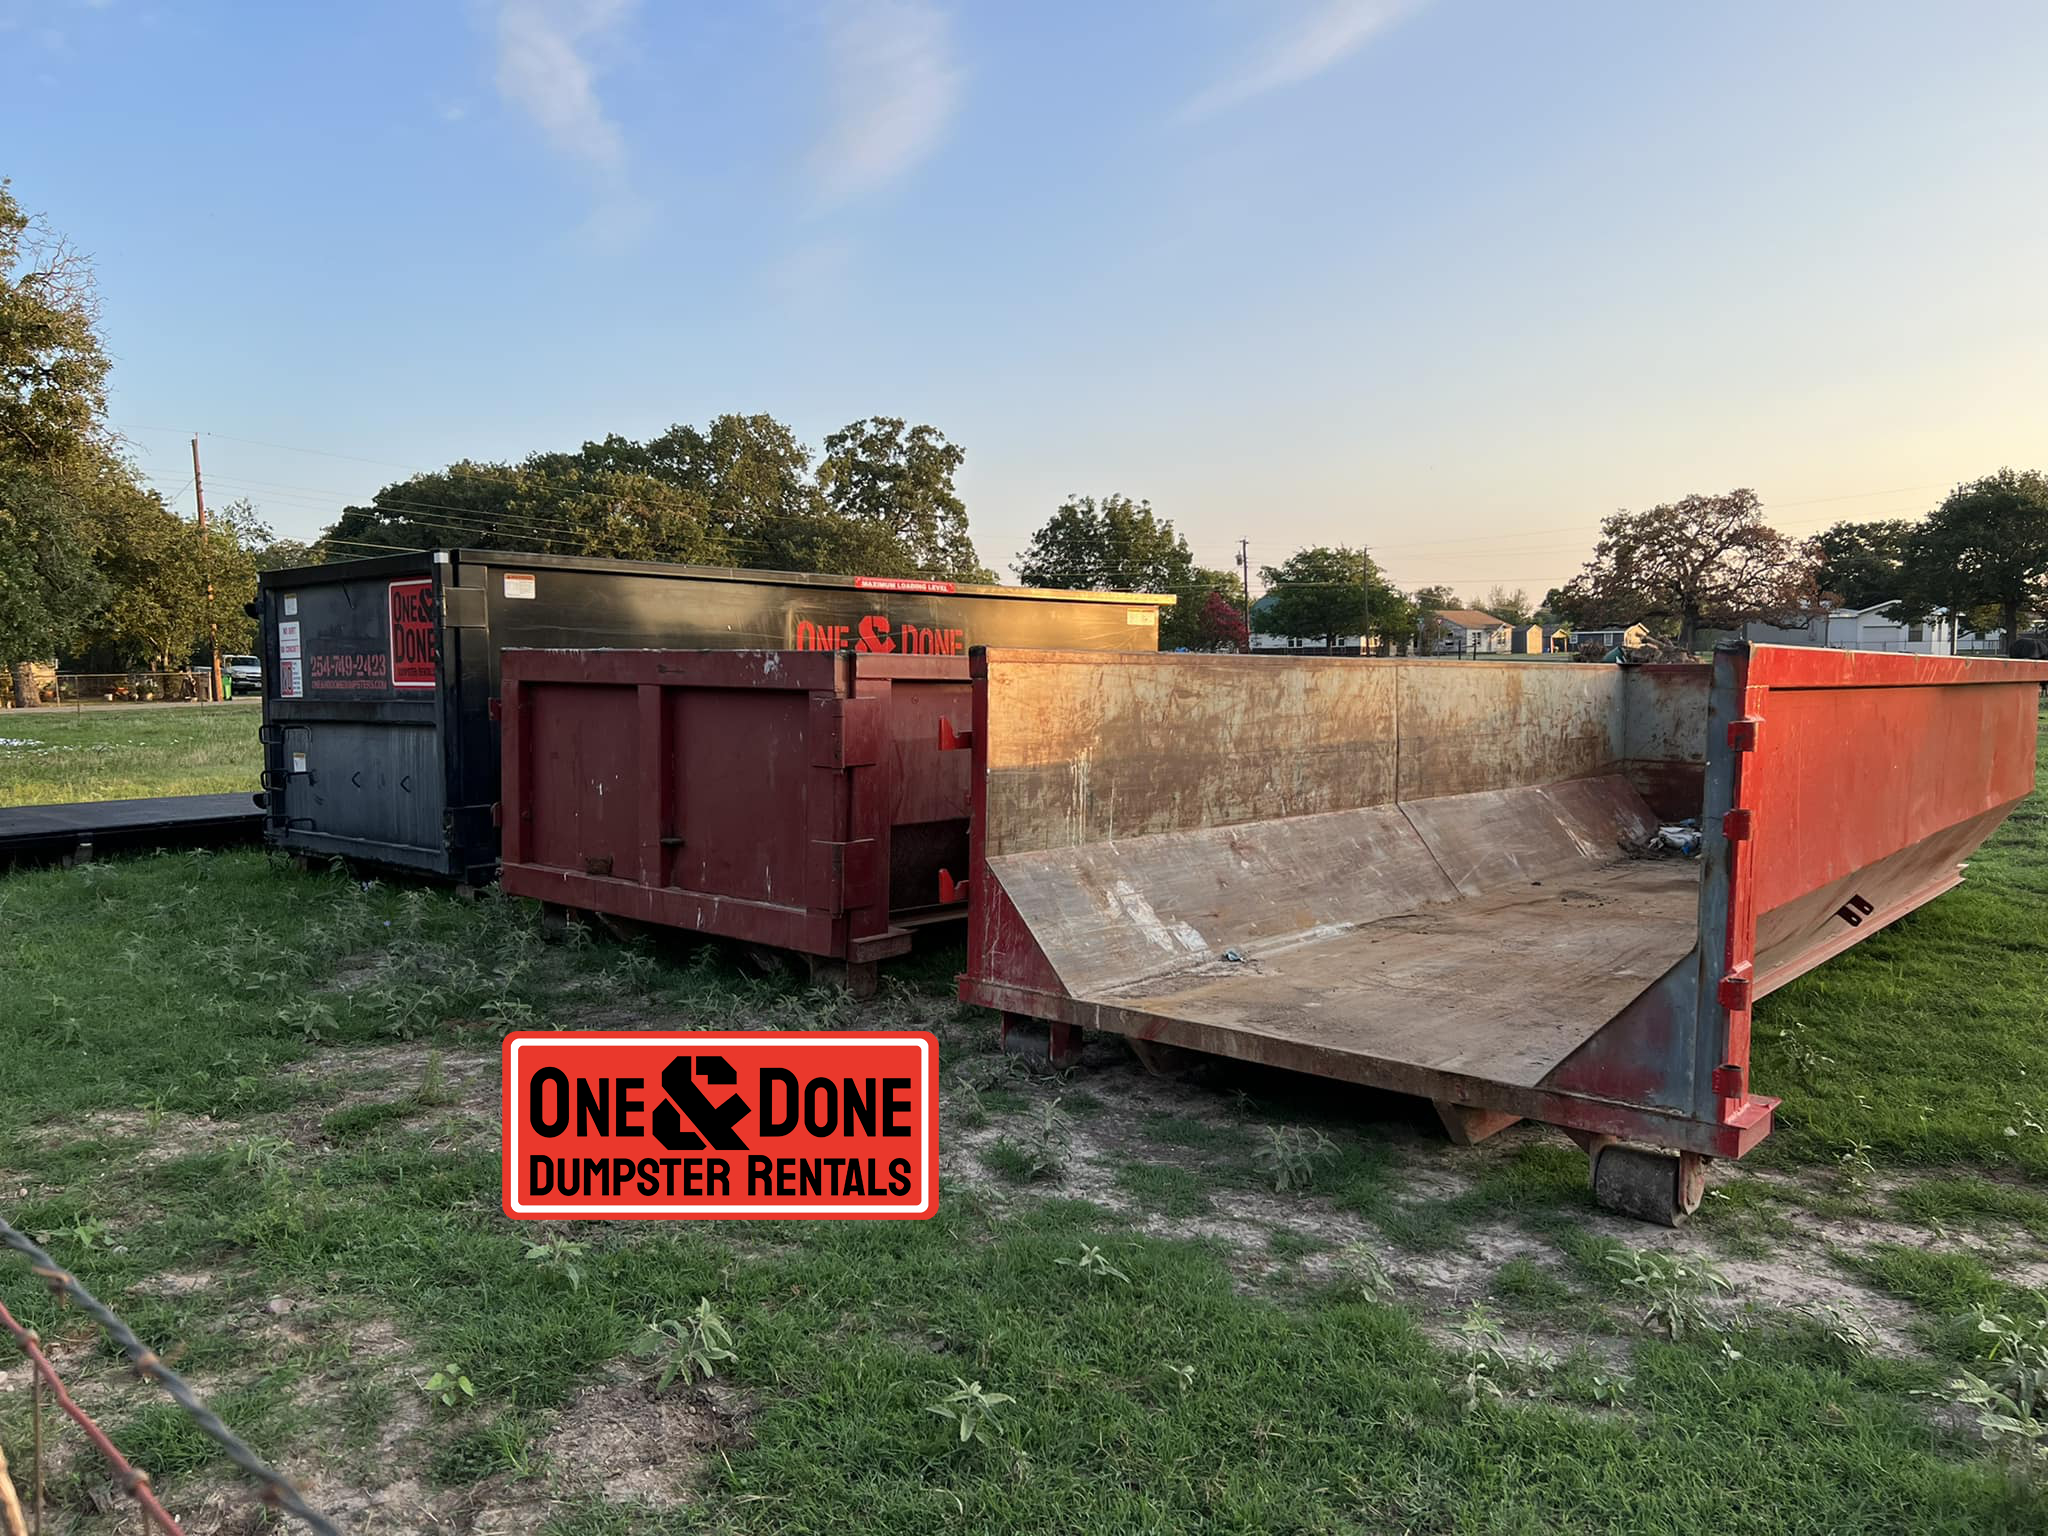 Construction Dumpster Rental One and Done Dumpster Rentals Hewitt TX Contractors Can Trust